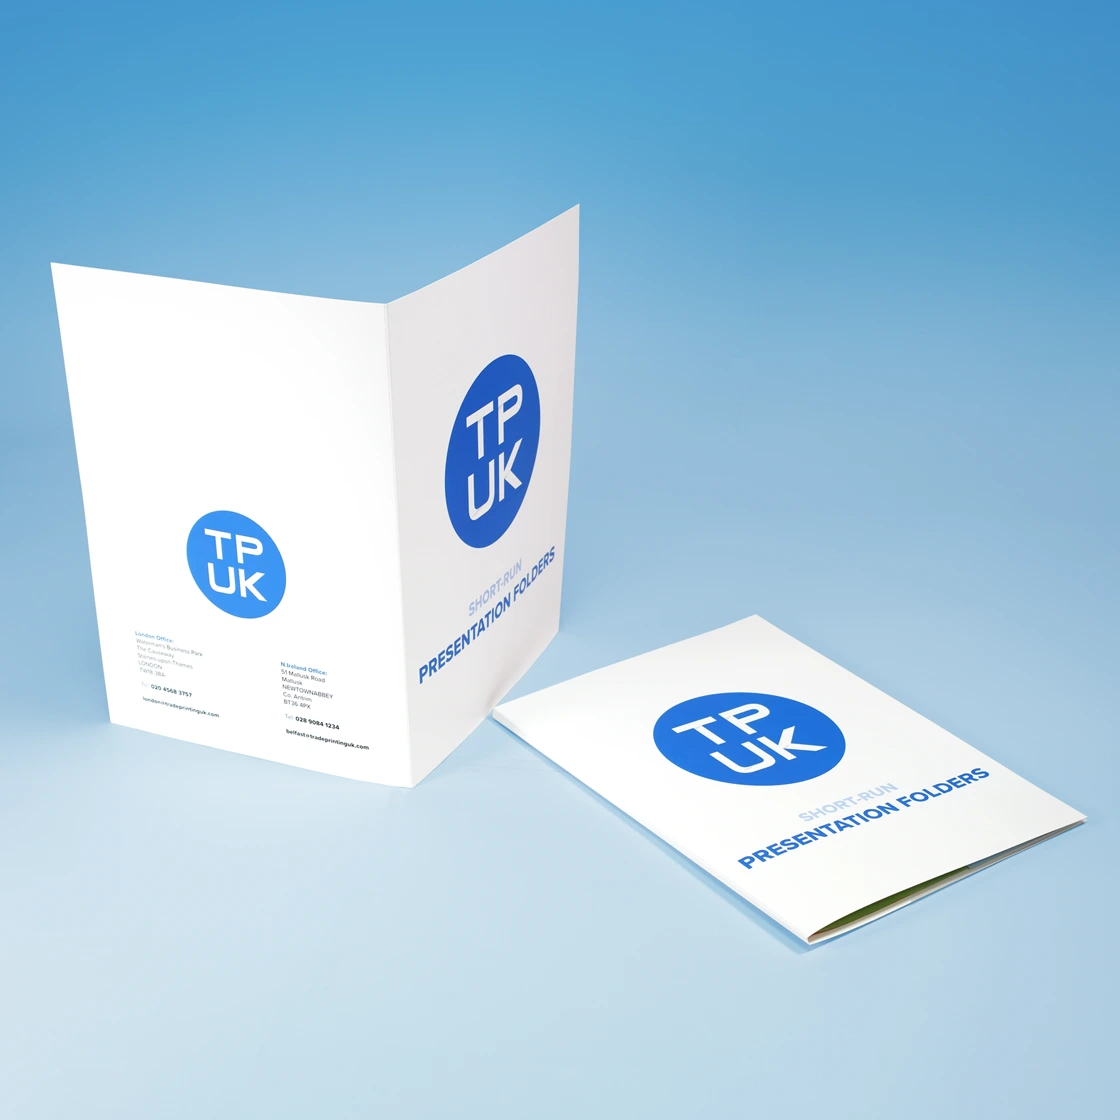 Folder Printing for Meetings and Conferences in the UK